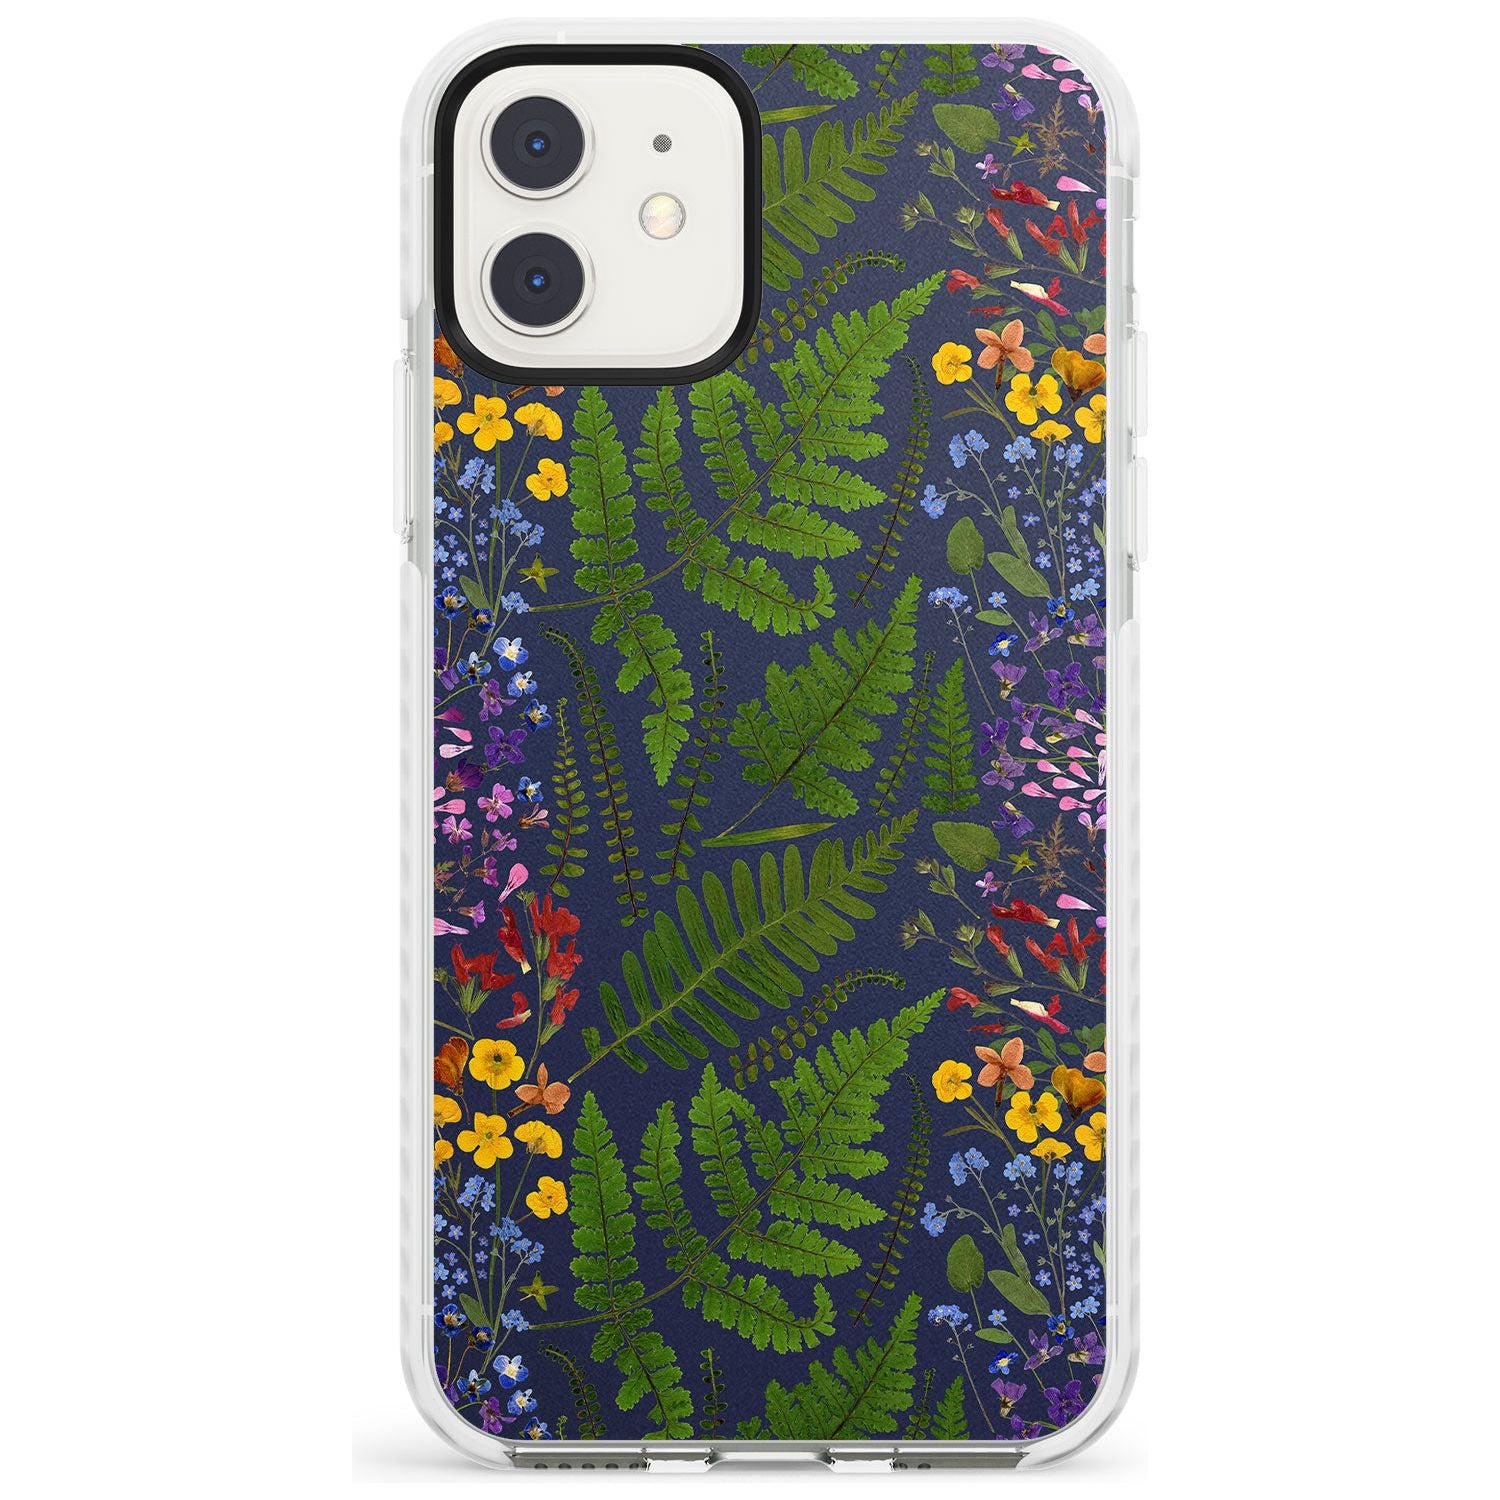 Busy Floral and Fern Design - Navy Impact Phone Case for iPhone 11